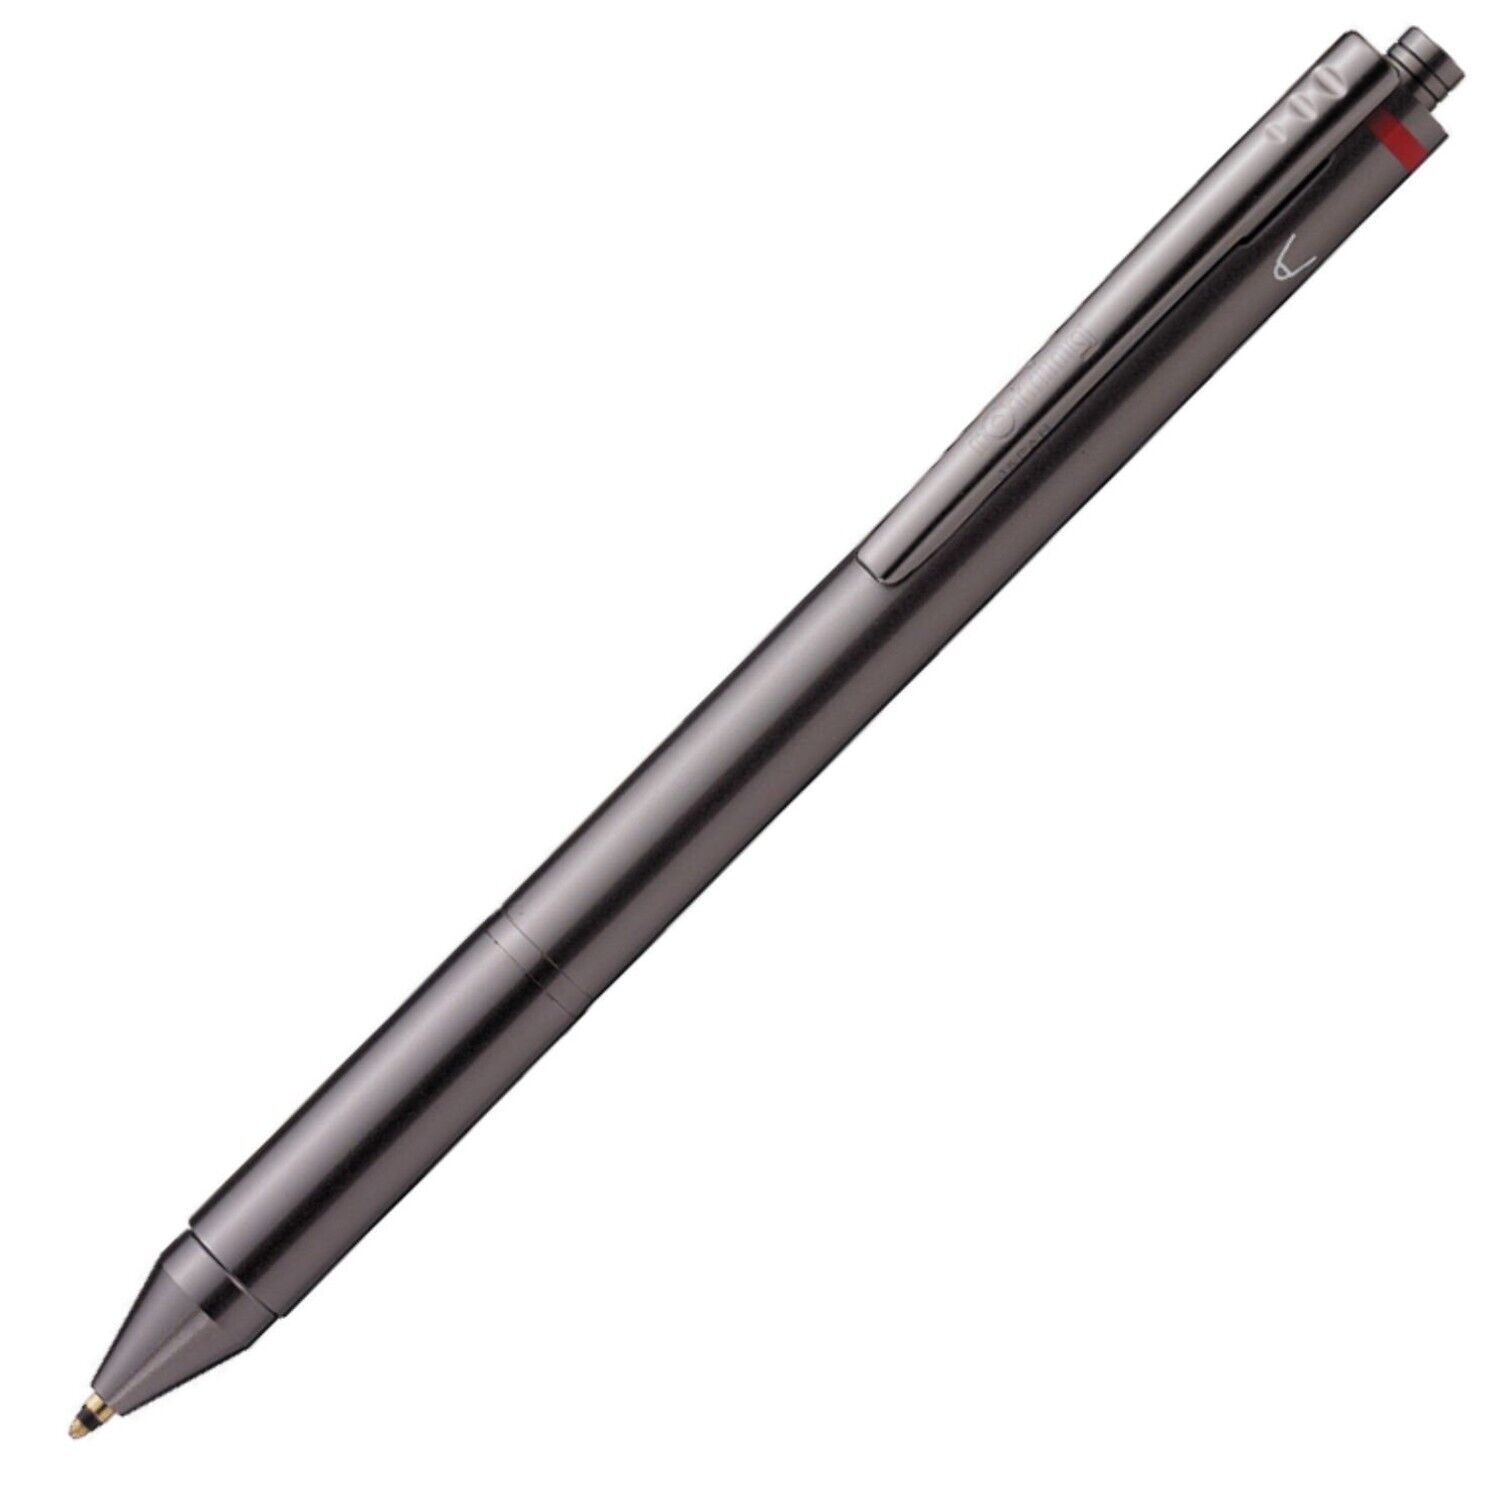 rOtring Multi-Function Pen, Four-In-One, 0.5mm Mechanical Pencil with Black